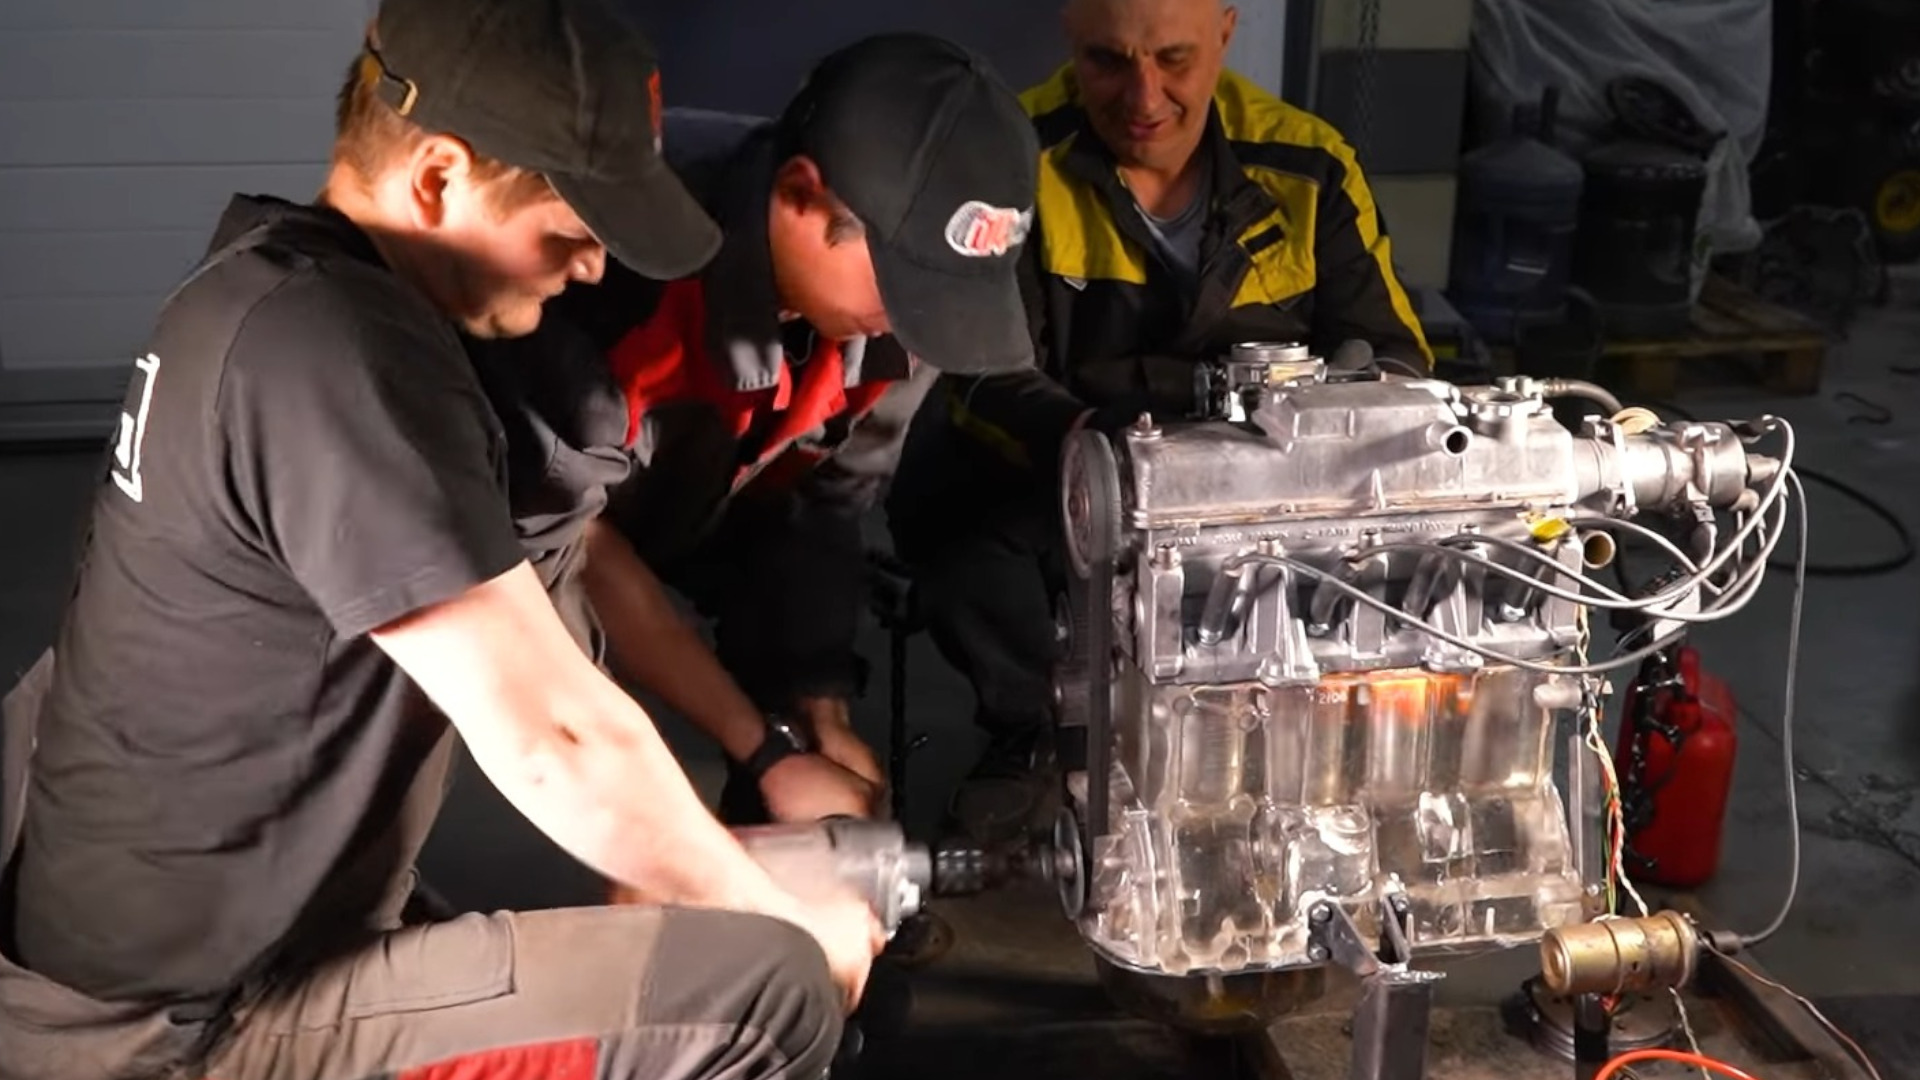 Transparent Engine Block Made of Resin Actually Runs, But Just for a Second